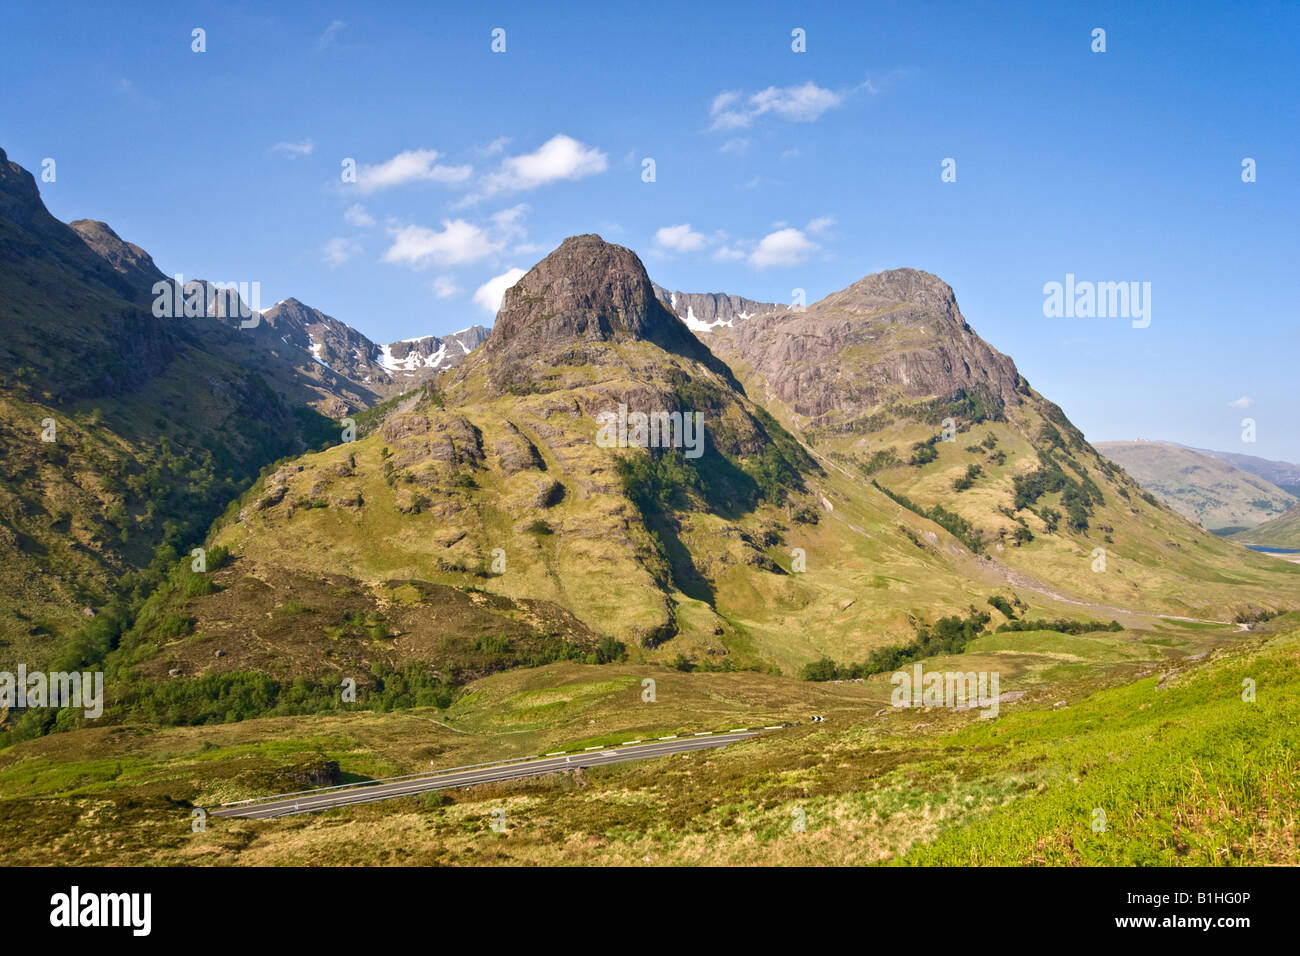 The famous Three Sisters mountains in Glen Coe West Highlands Scotland Stock Photo